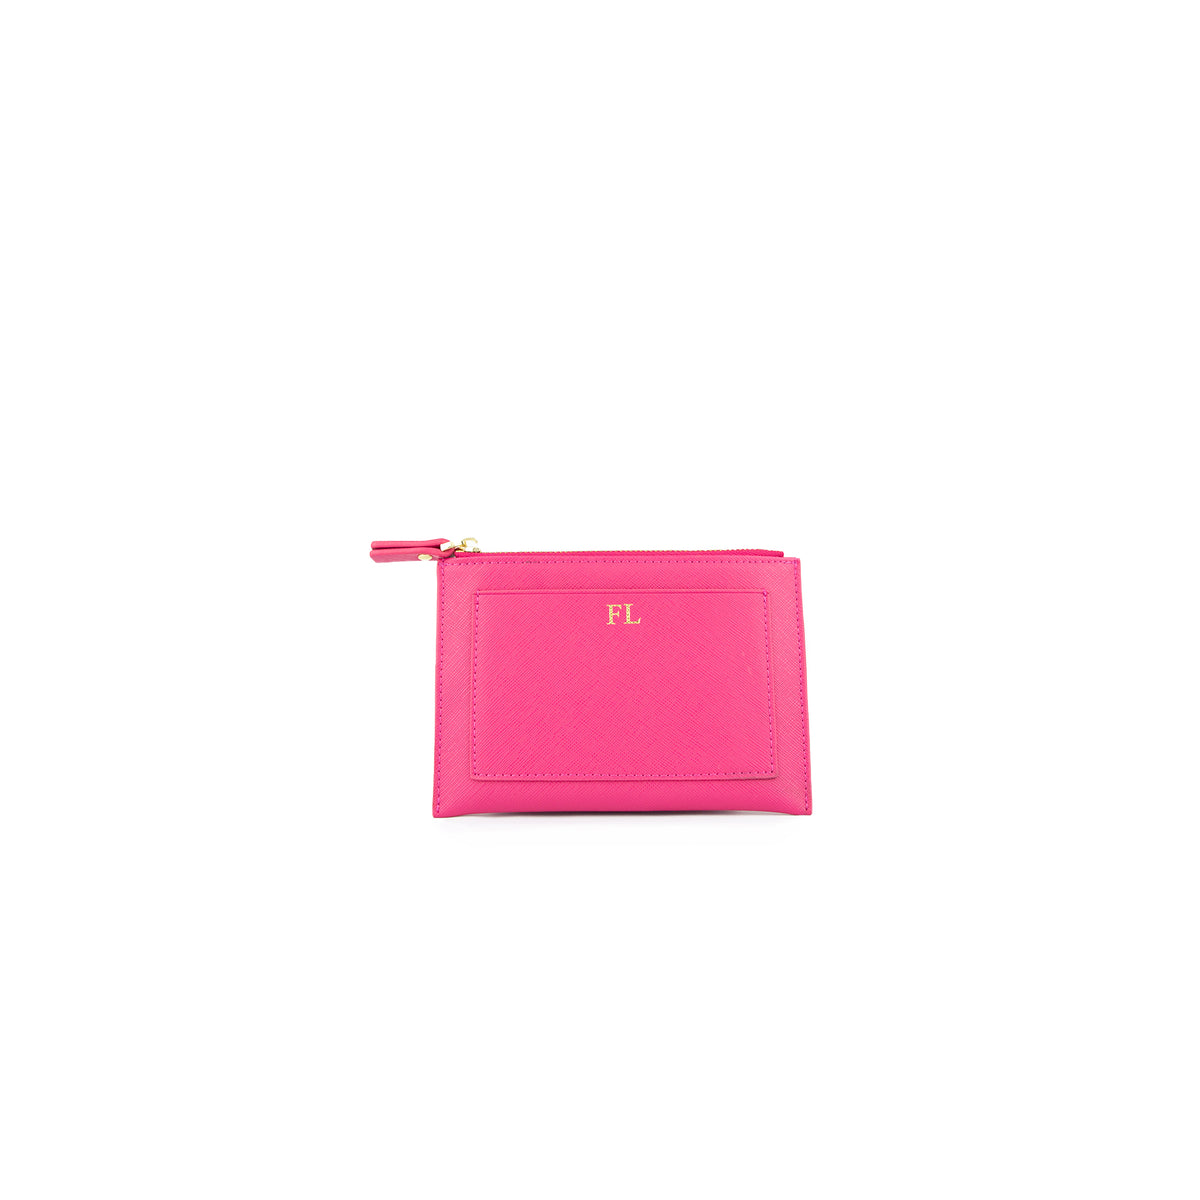 Personalised Pink Monogrammed Saffiano Leather Coin Purse